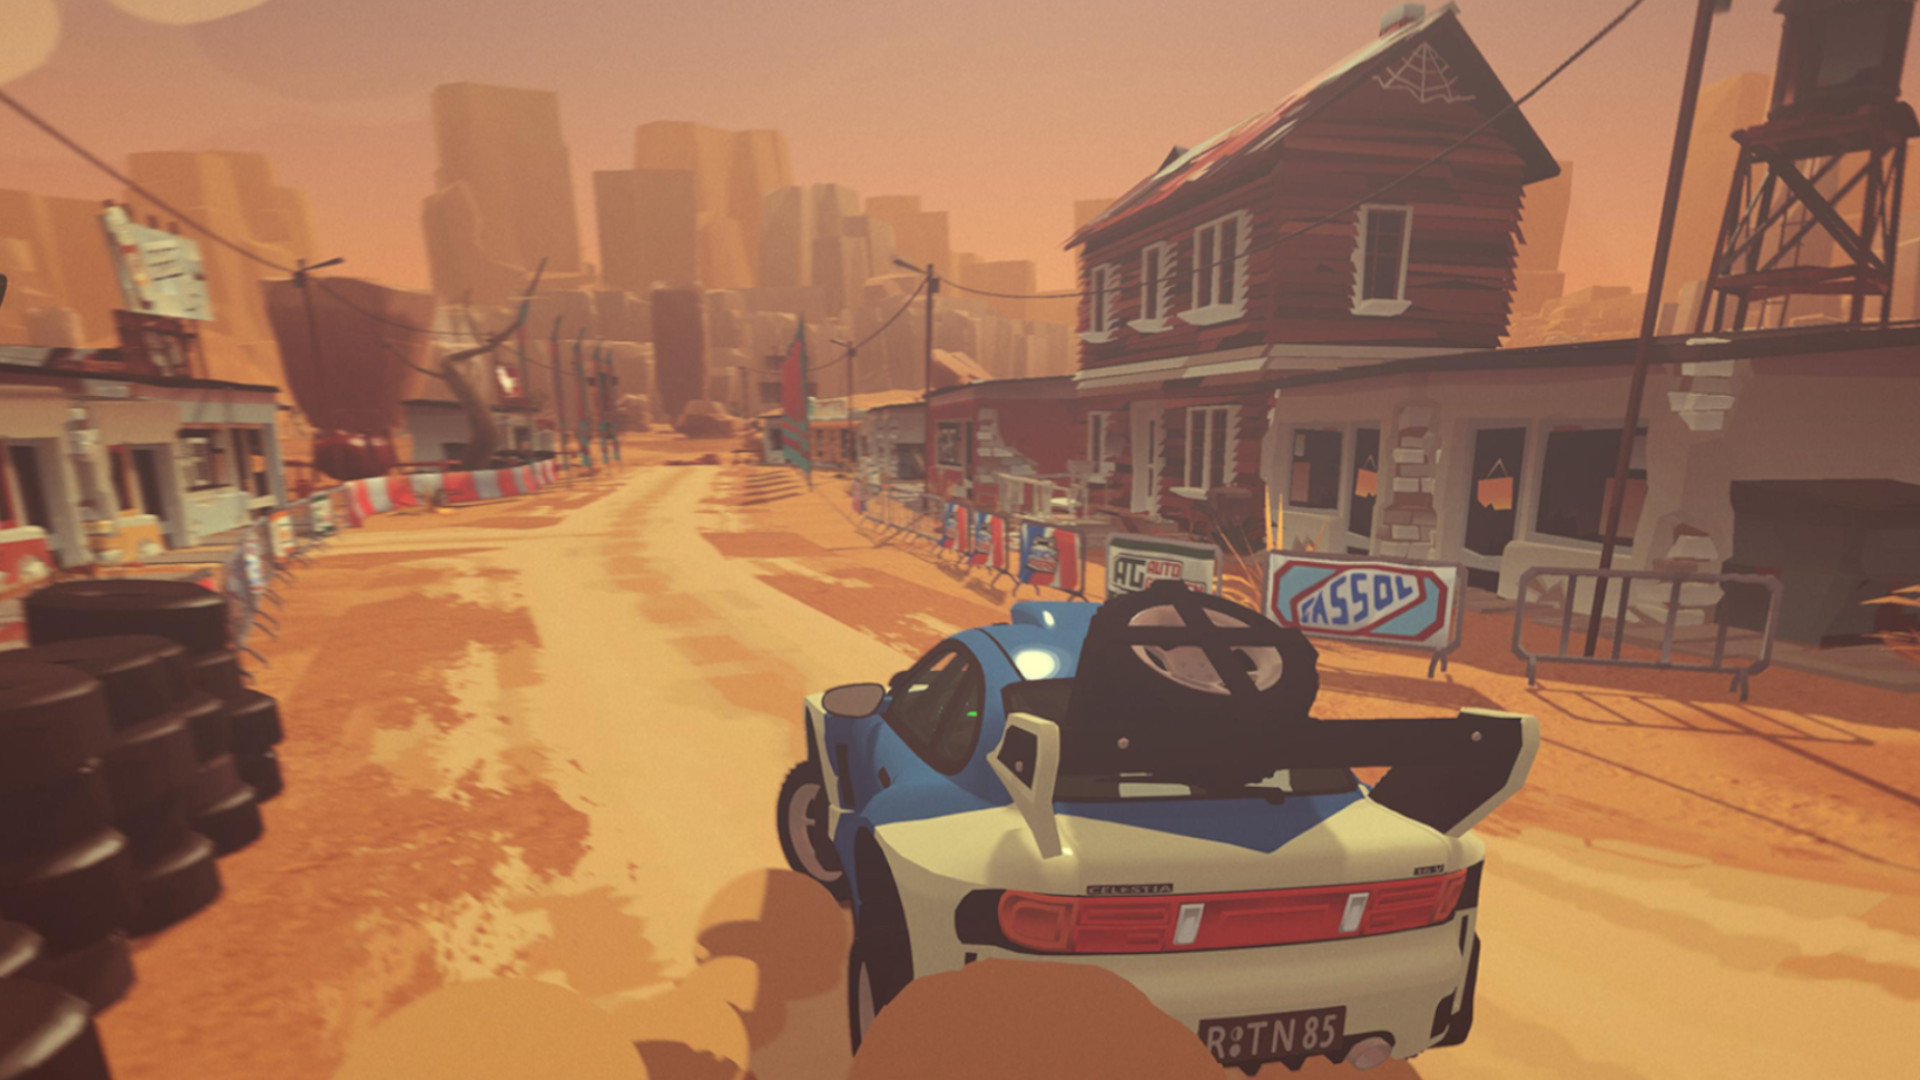 Vibrant '90s Steam rally racer coming soon, has a demo to test drive